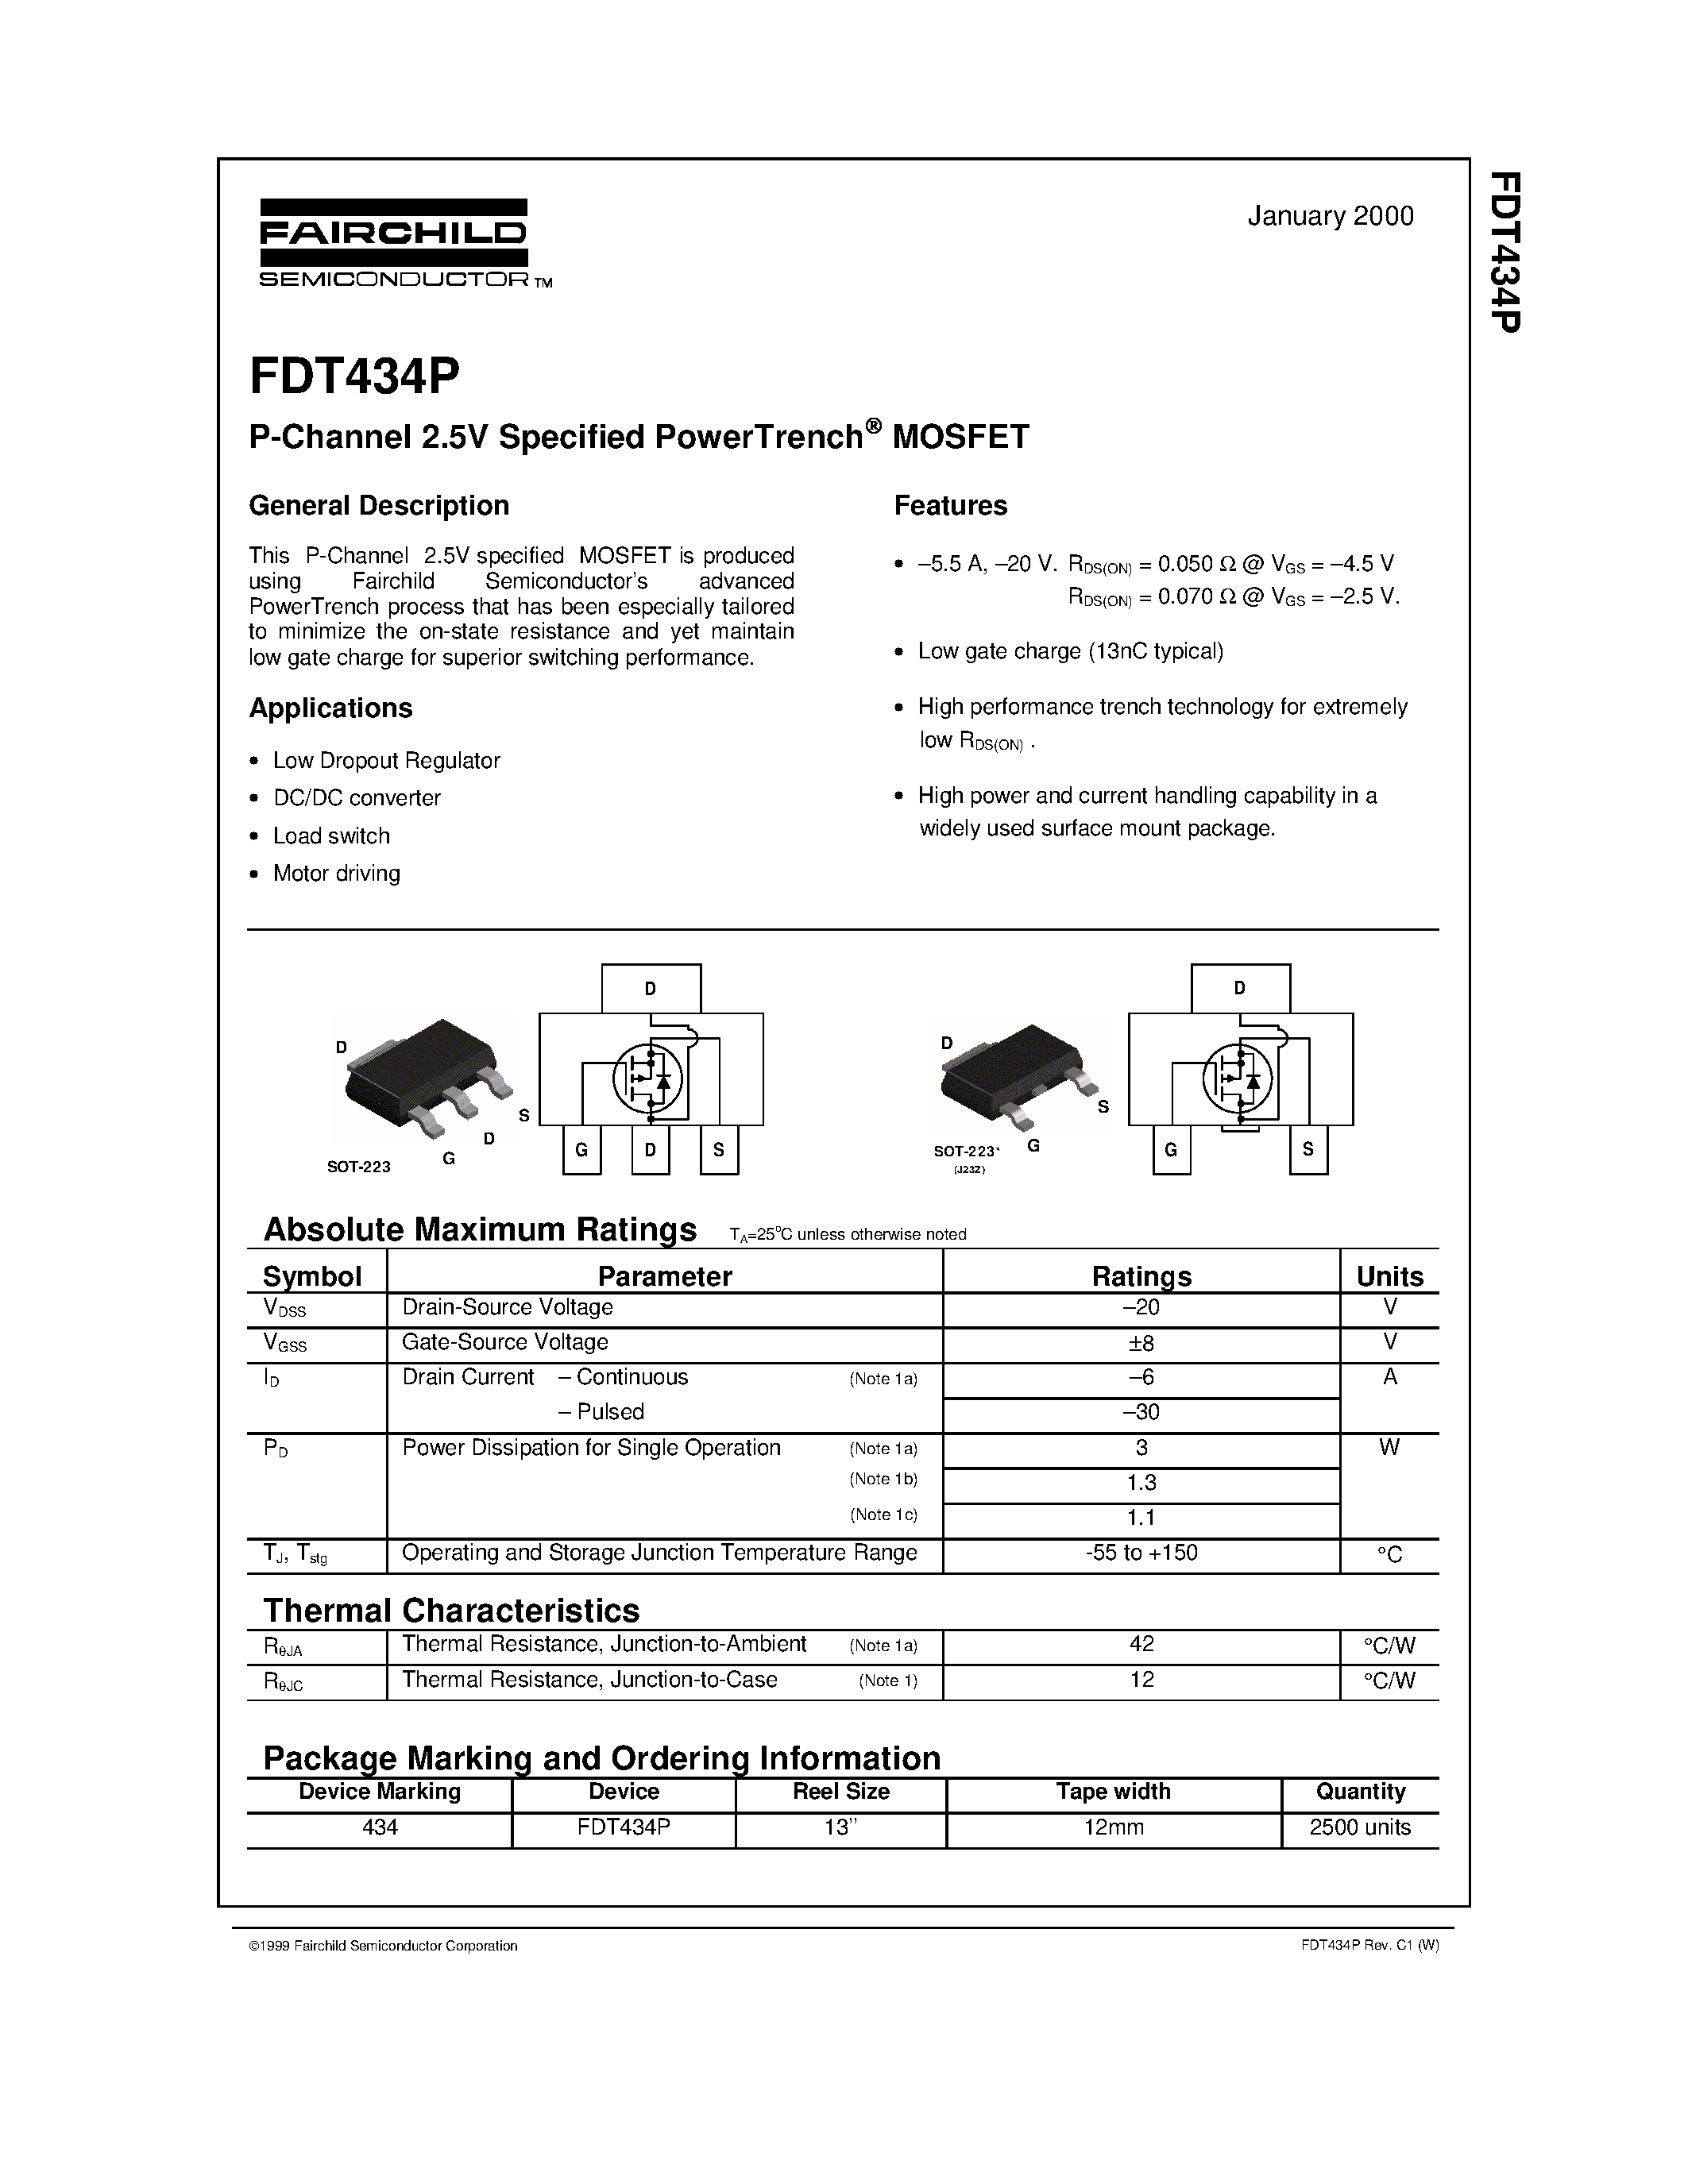 Datasheet FDT434P - P-Channel 2.5V Specified PowerTrench MOSFET page 1